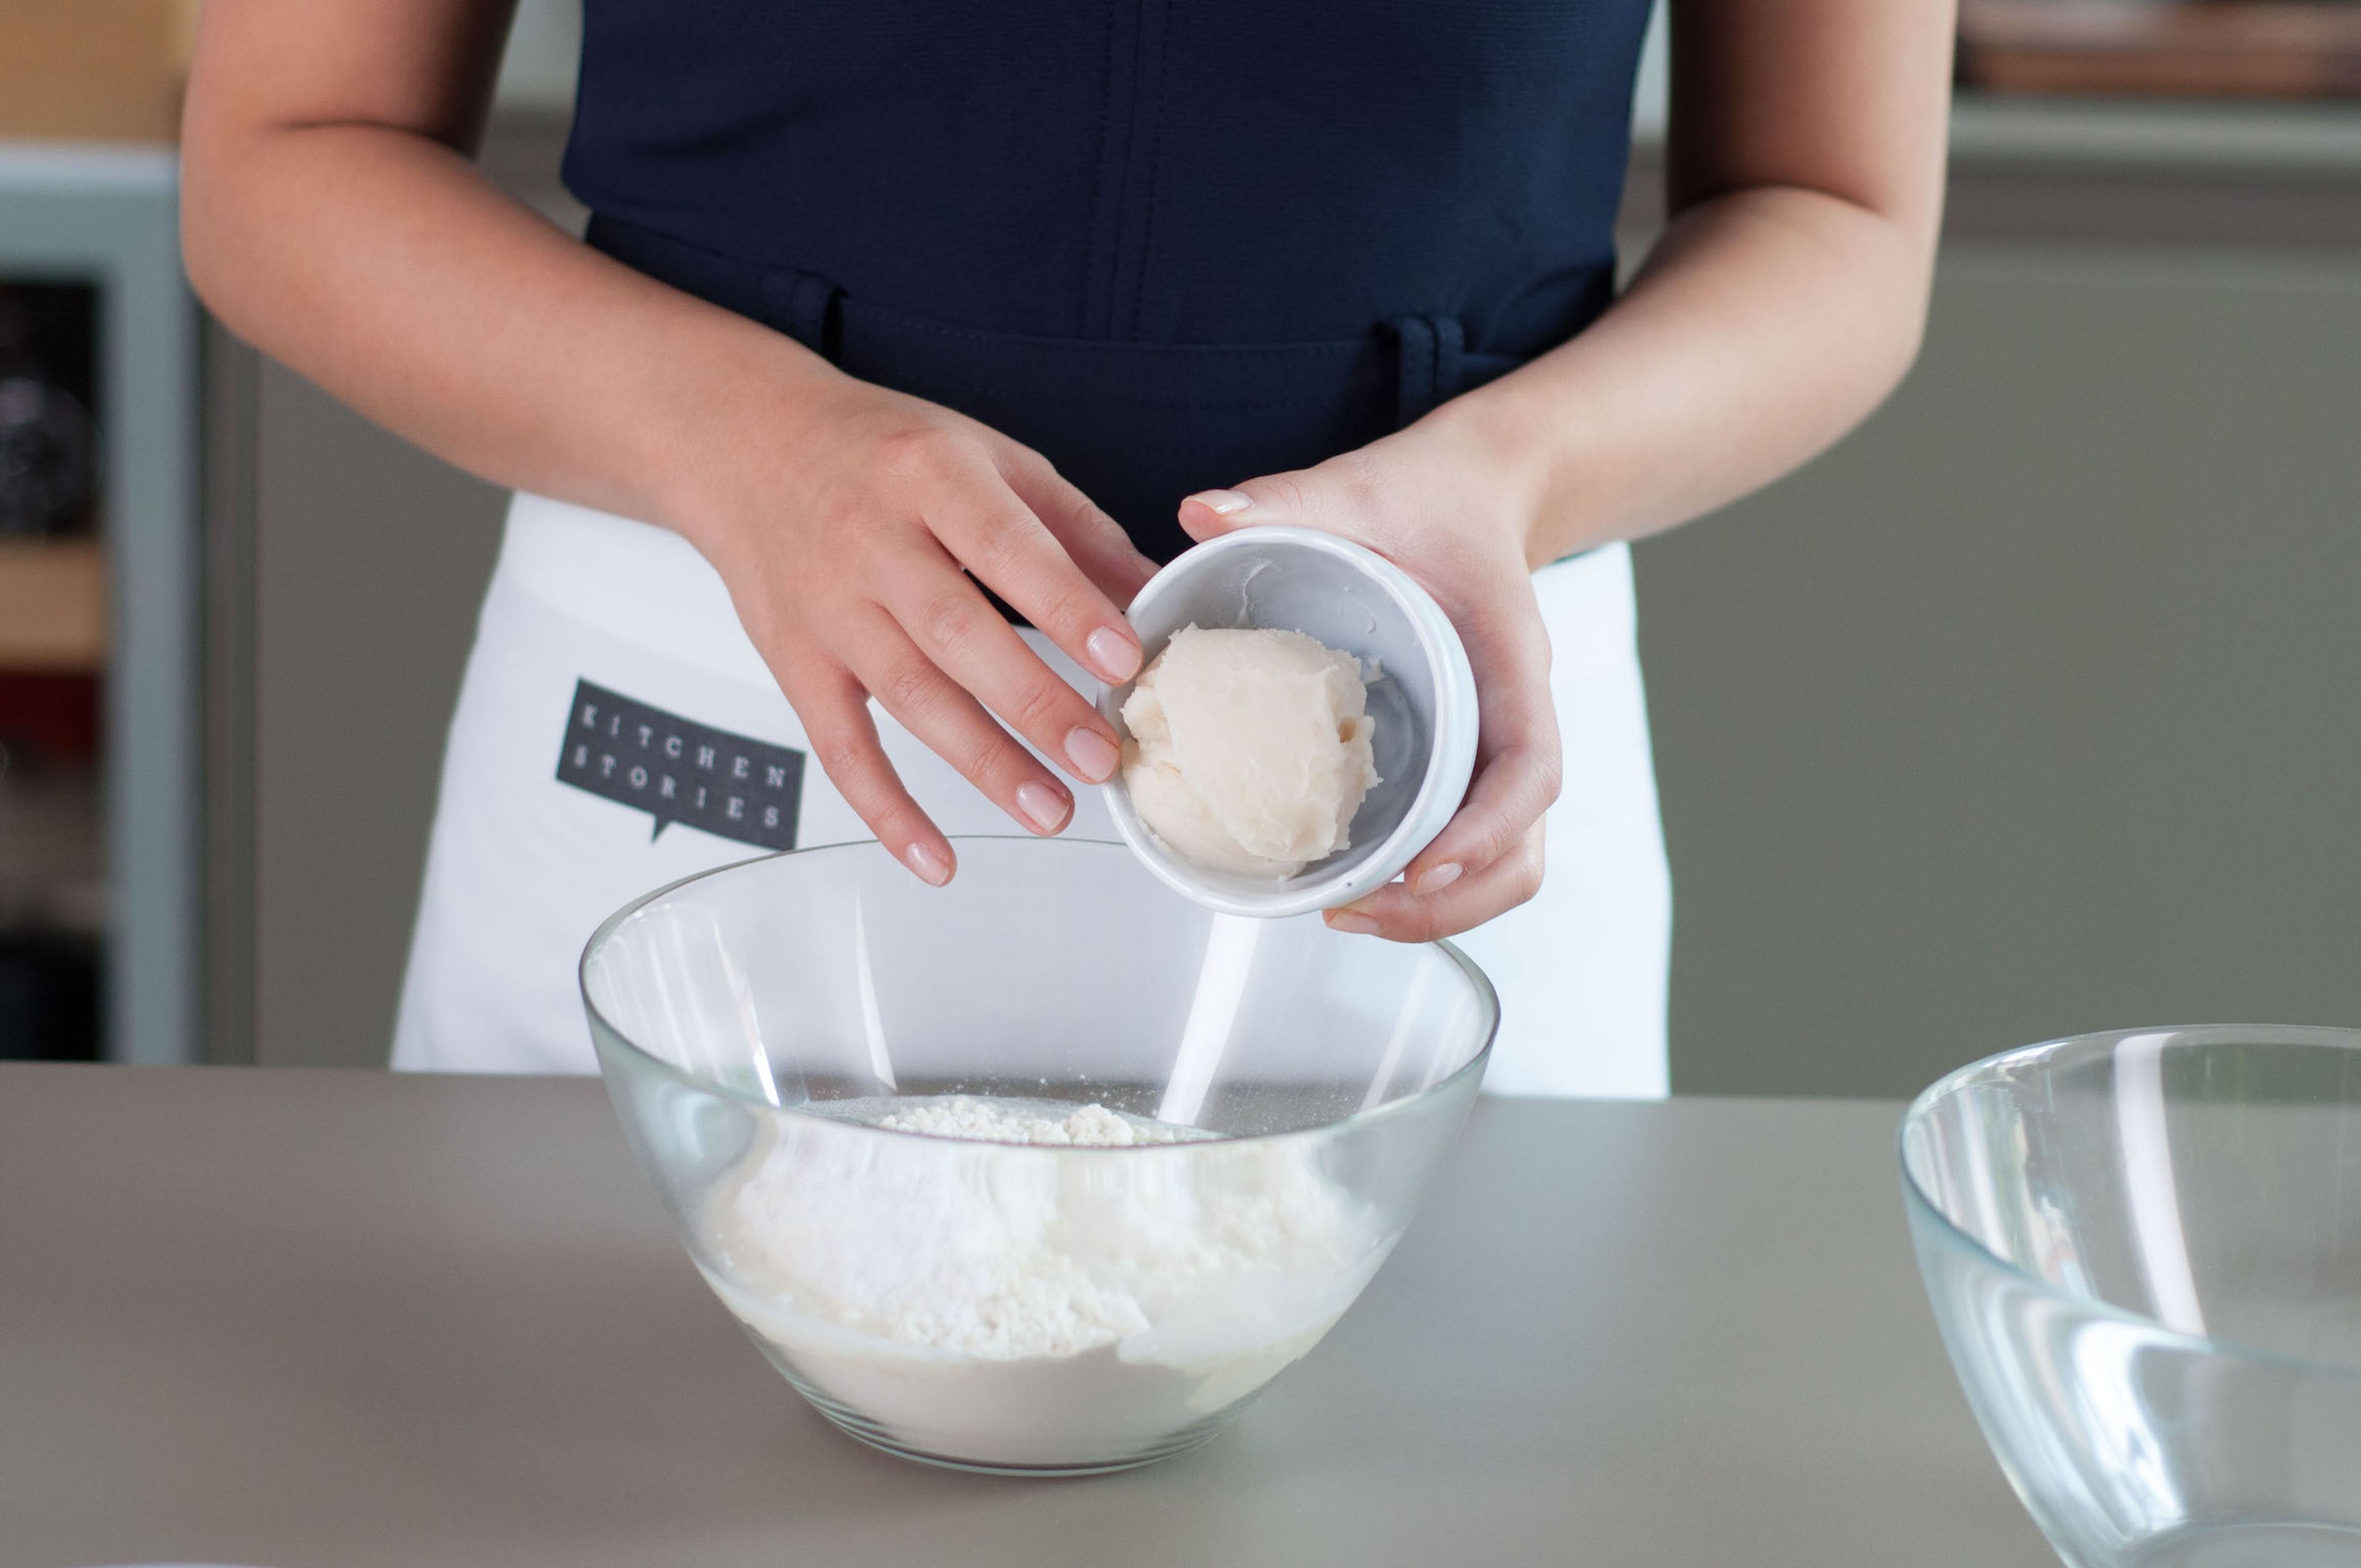 Mix two thirds of the flour with the confectioner’s sugar, water and half of the lard. Knead into a smooth dough, set aside and let rest for approx. 30 min.